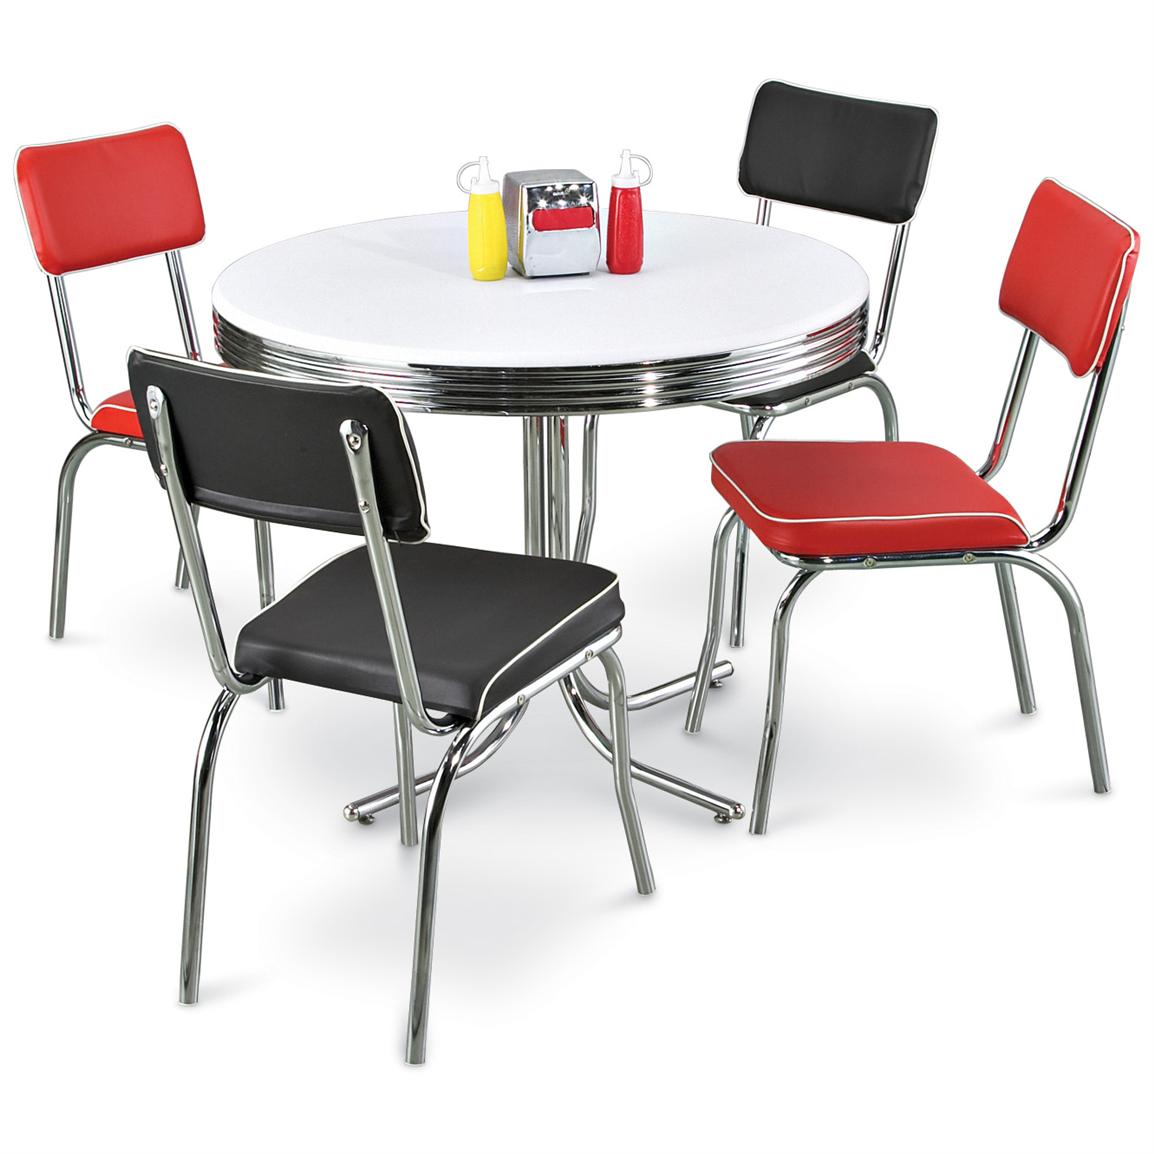 Retro '50s-style Dining Set - 118504, Kitchen & Dining Stools at